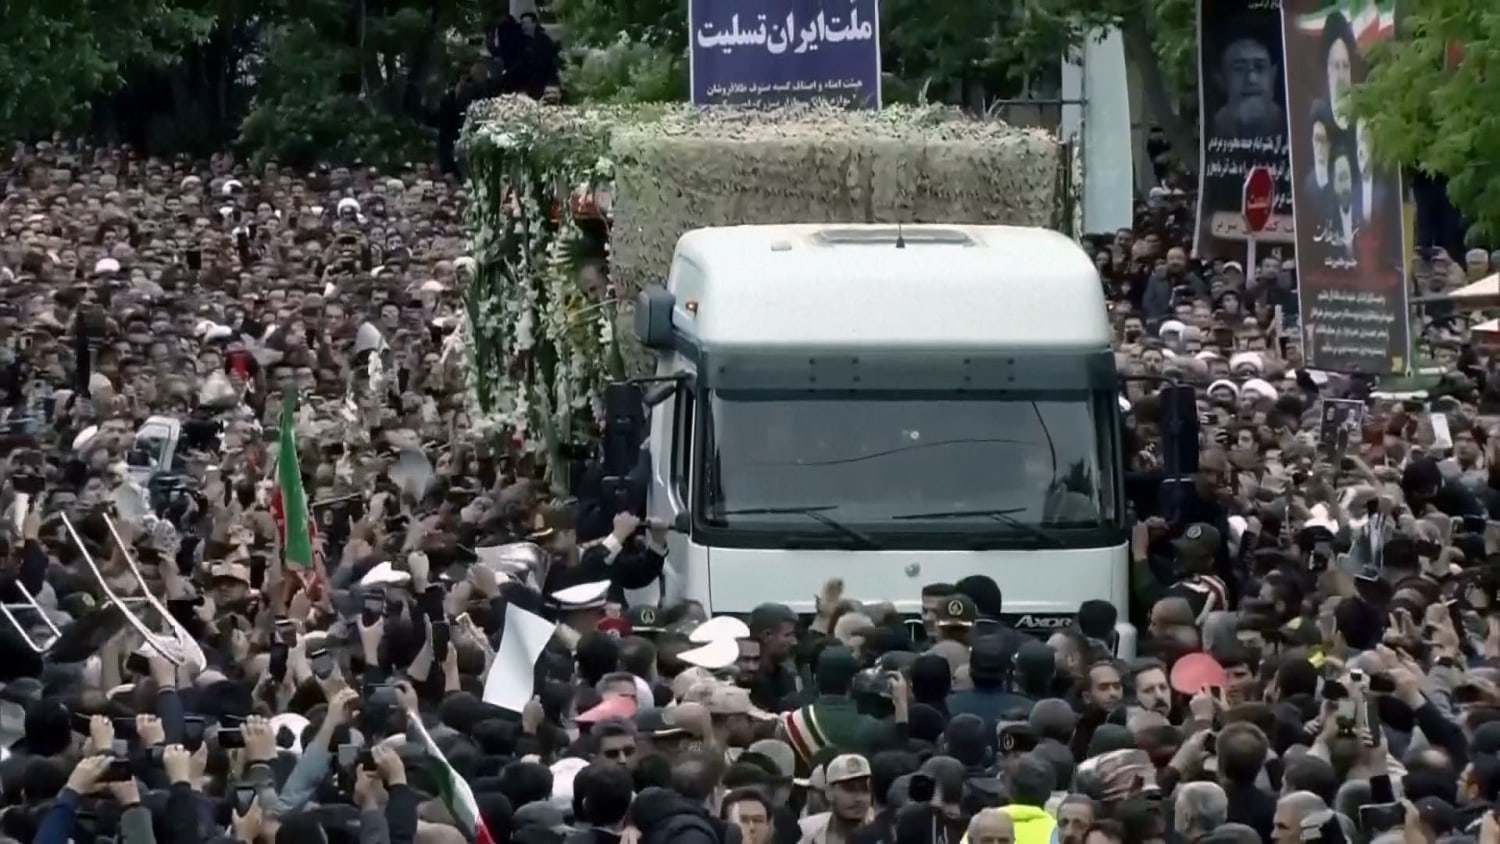 Mourners surround truck carrying remains of Iranian president – NBC News